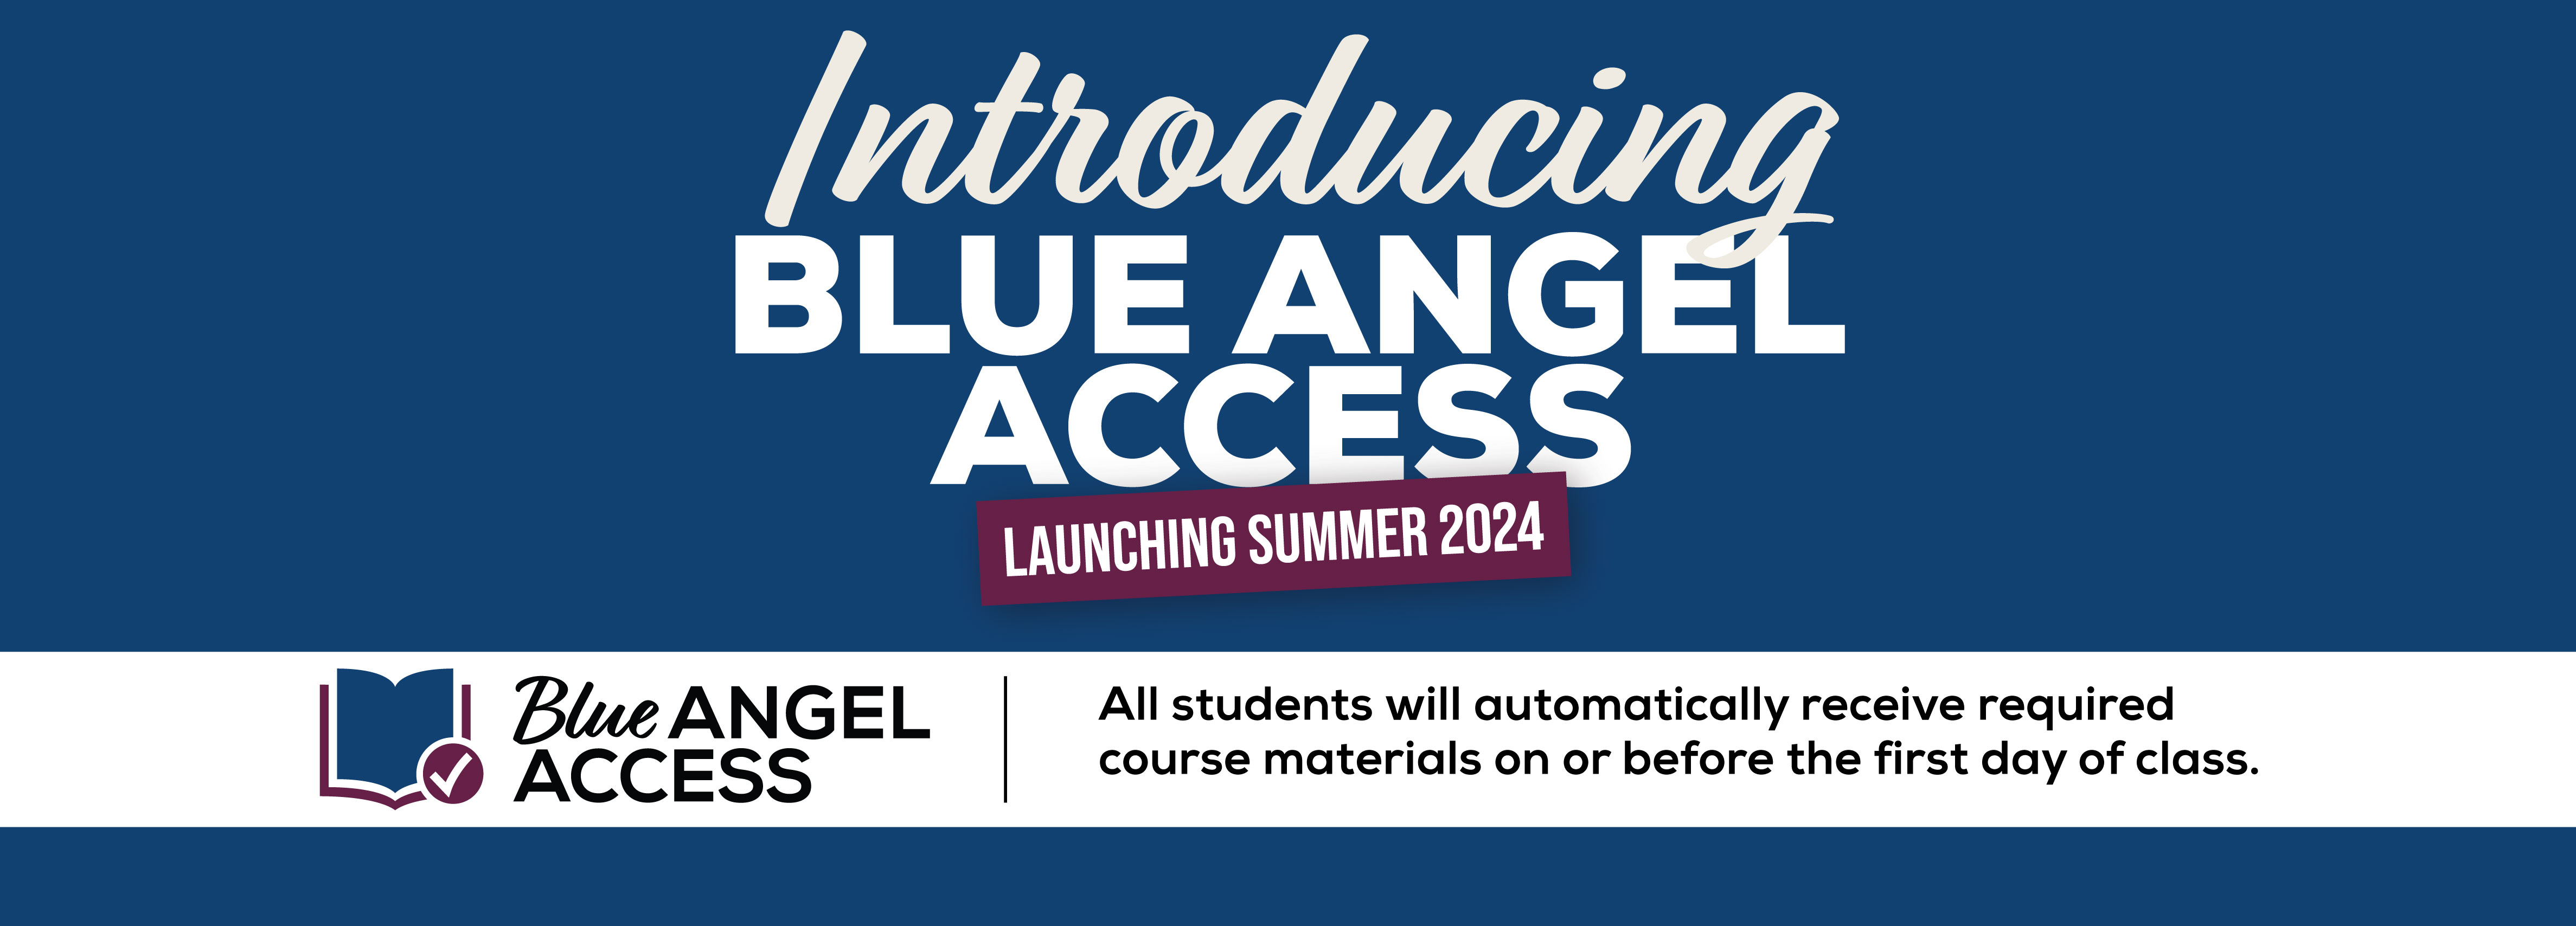 Introducing Blue Angel Access Launching Summer 2024 All students will automatically receive required course materials on or before the first day of class.